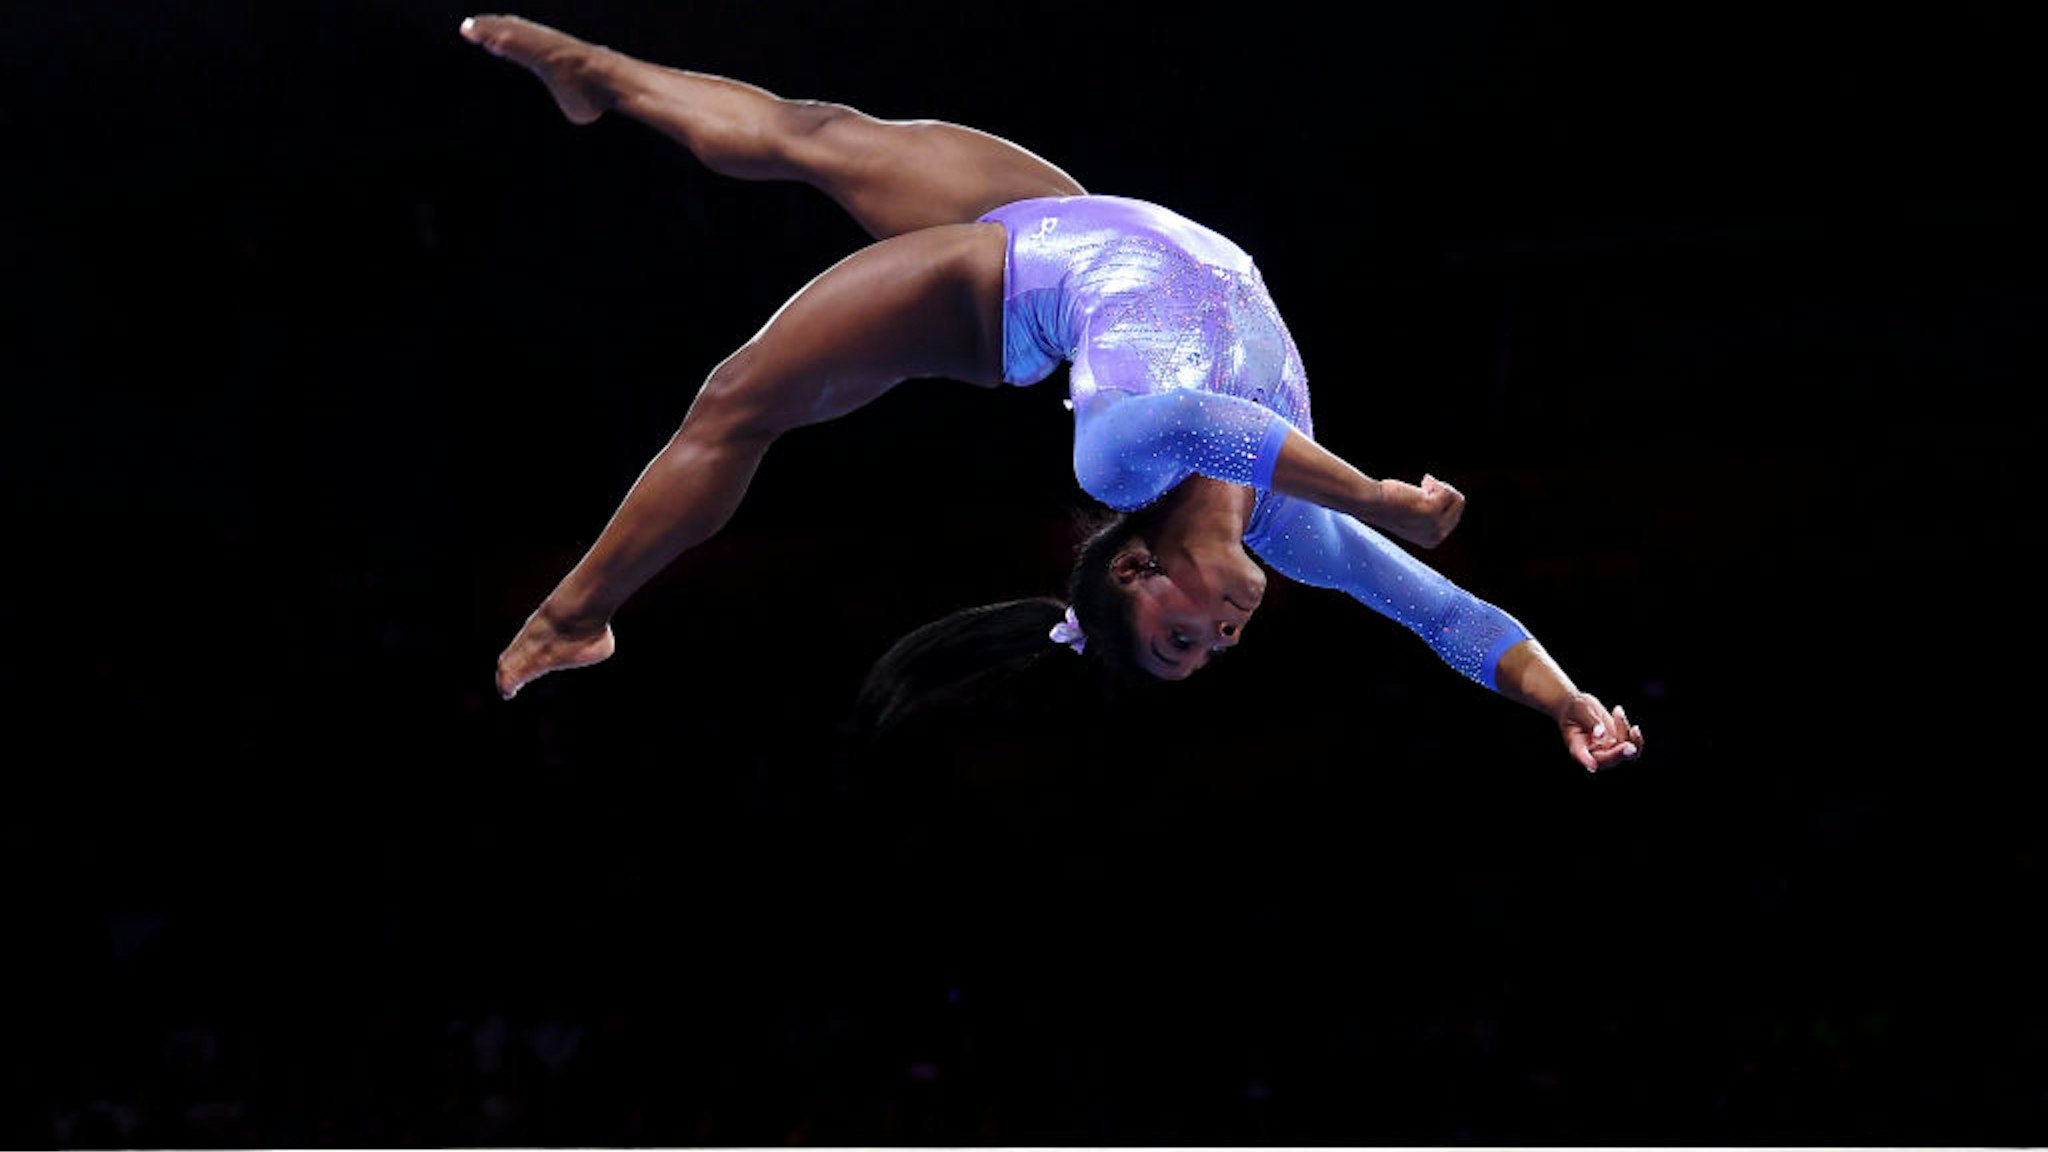 STUTTGART, GERMANY - OCTOBER 13: Simone Biles of USA competes on Balance Beam during the Apparatus Finals on Day 10 of the FIG Artistic Gymnastics World Championships at Hanns Martin Schleyer Hall on October 13, 2019 in Stuttgart, Germany. (Photo by Laurence Griffiths/Getty Images)STUTTGART, GERMANY - OCTOBER 13: Simone Biles of USA competes on Balance Beam during the Apparatus Finals on Day 10 of the FIG Artistic Gymnastics World Championships at Hanns Martin Schleyer Hall on October 13, 2019 in Stuttgart, Germany. (Photo by Laurence Griffiths/Getty Images)